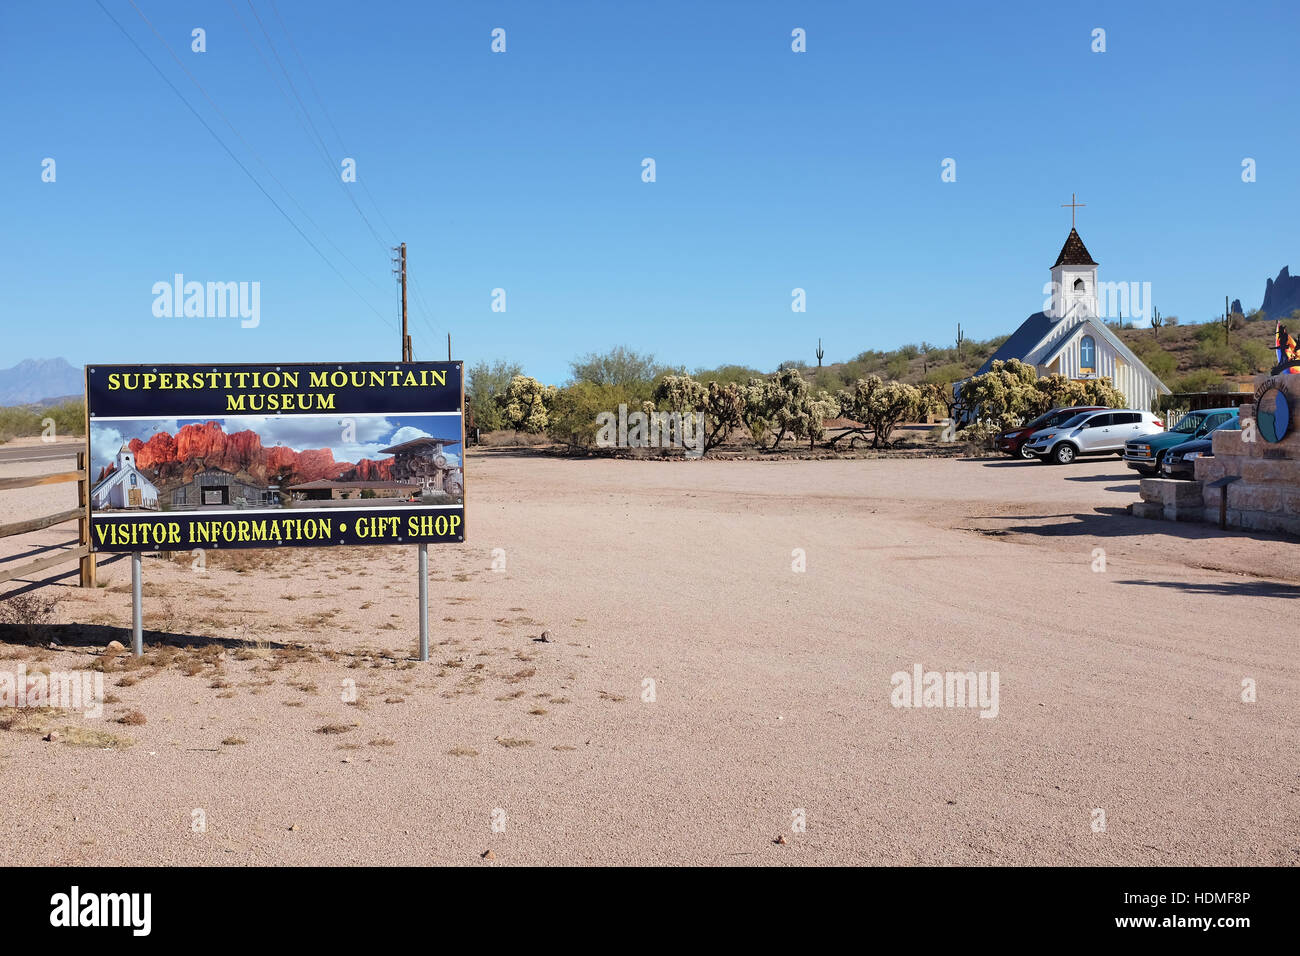 Parking Lot and Sign at the Superstition Mountain Museum on Route 88 in Apache Junction, Arizona. The Elvis Memorial Chapel is in the background. Stock Photo